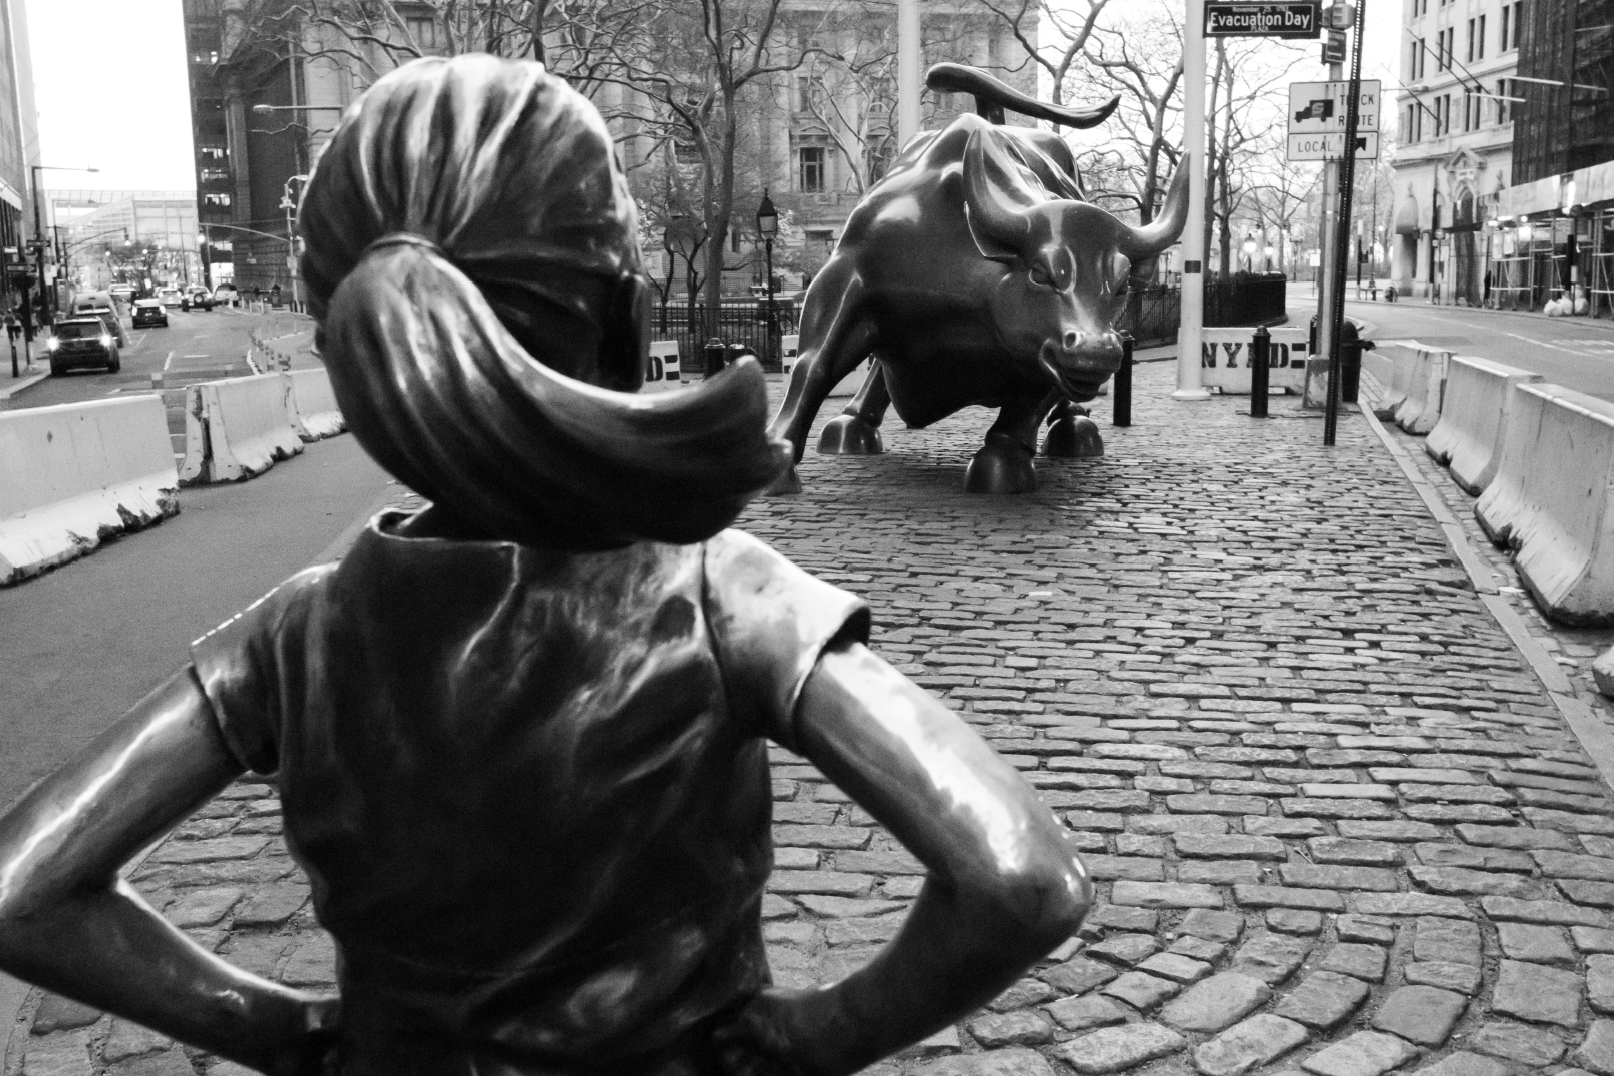 Little girl statue looking at the bull statue in NY Stock Exchange